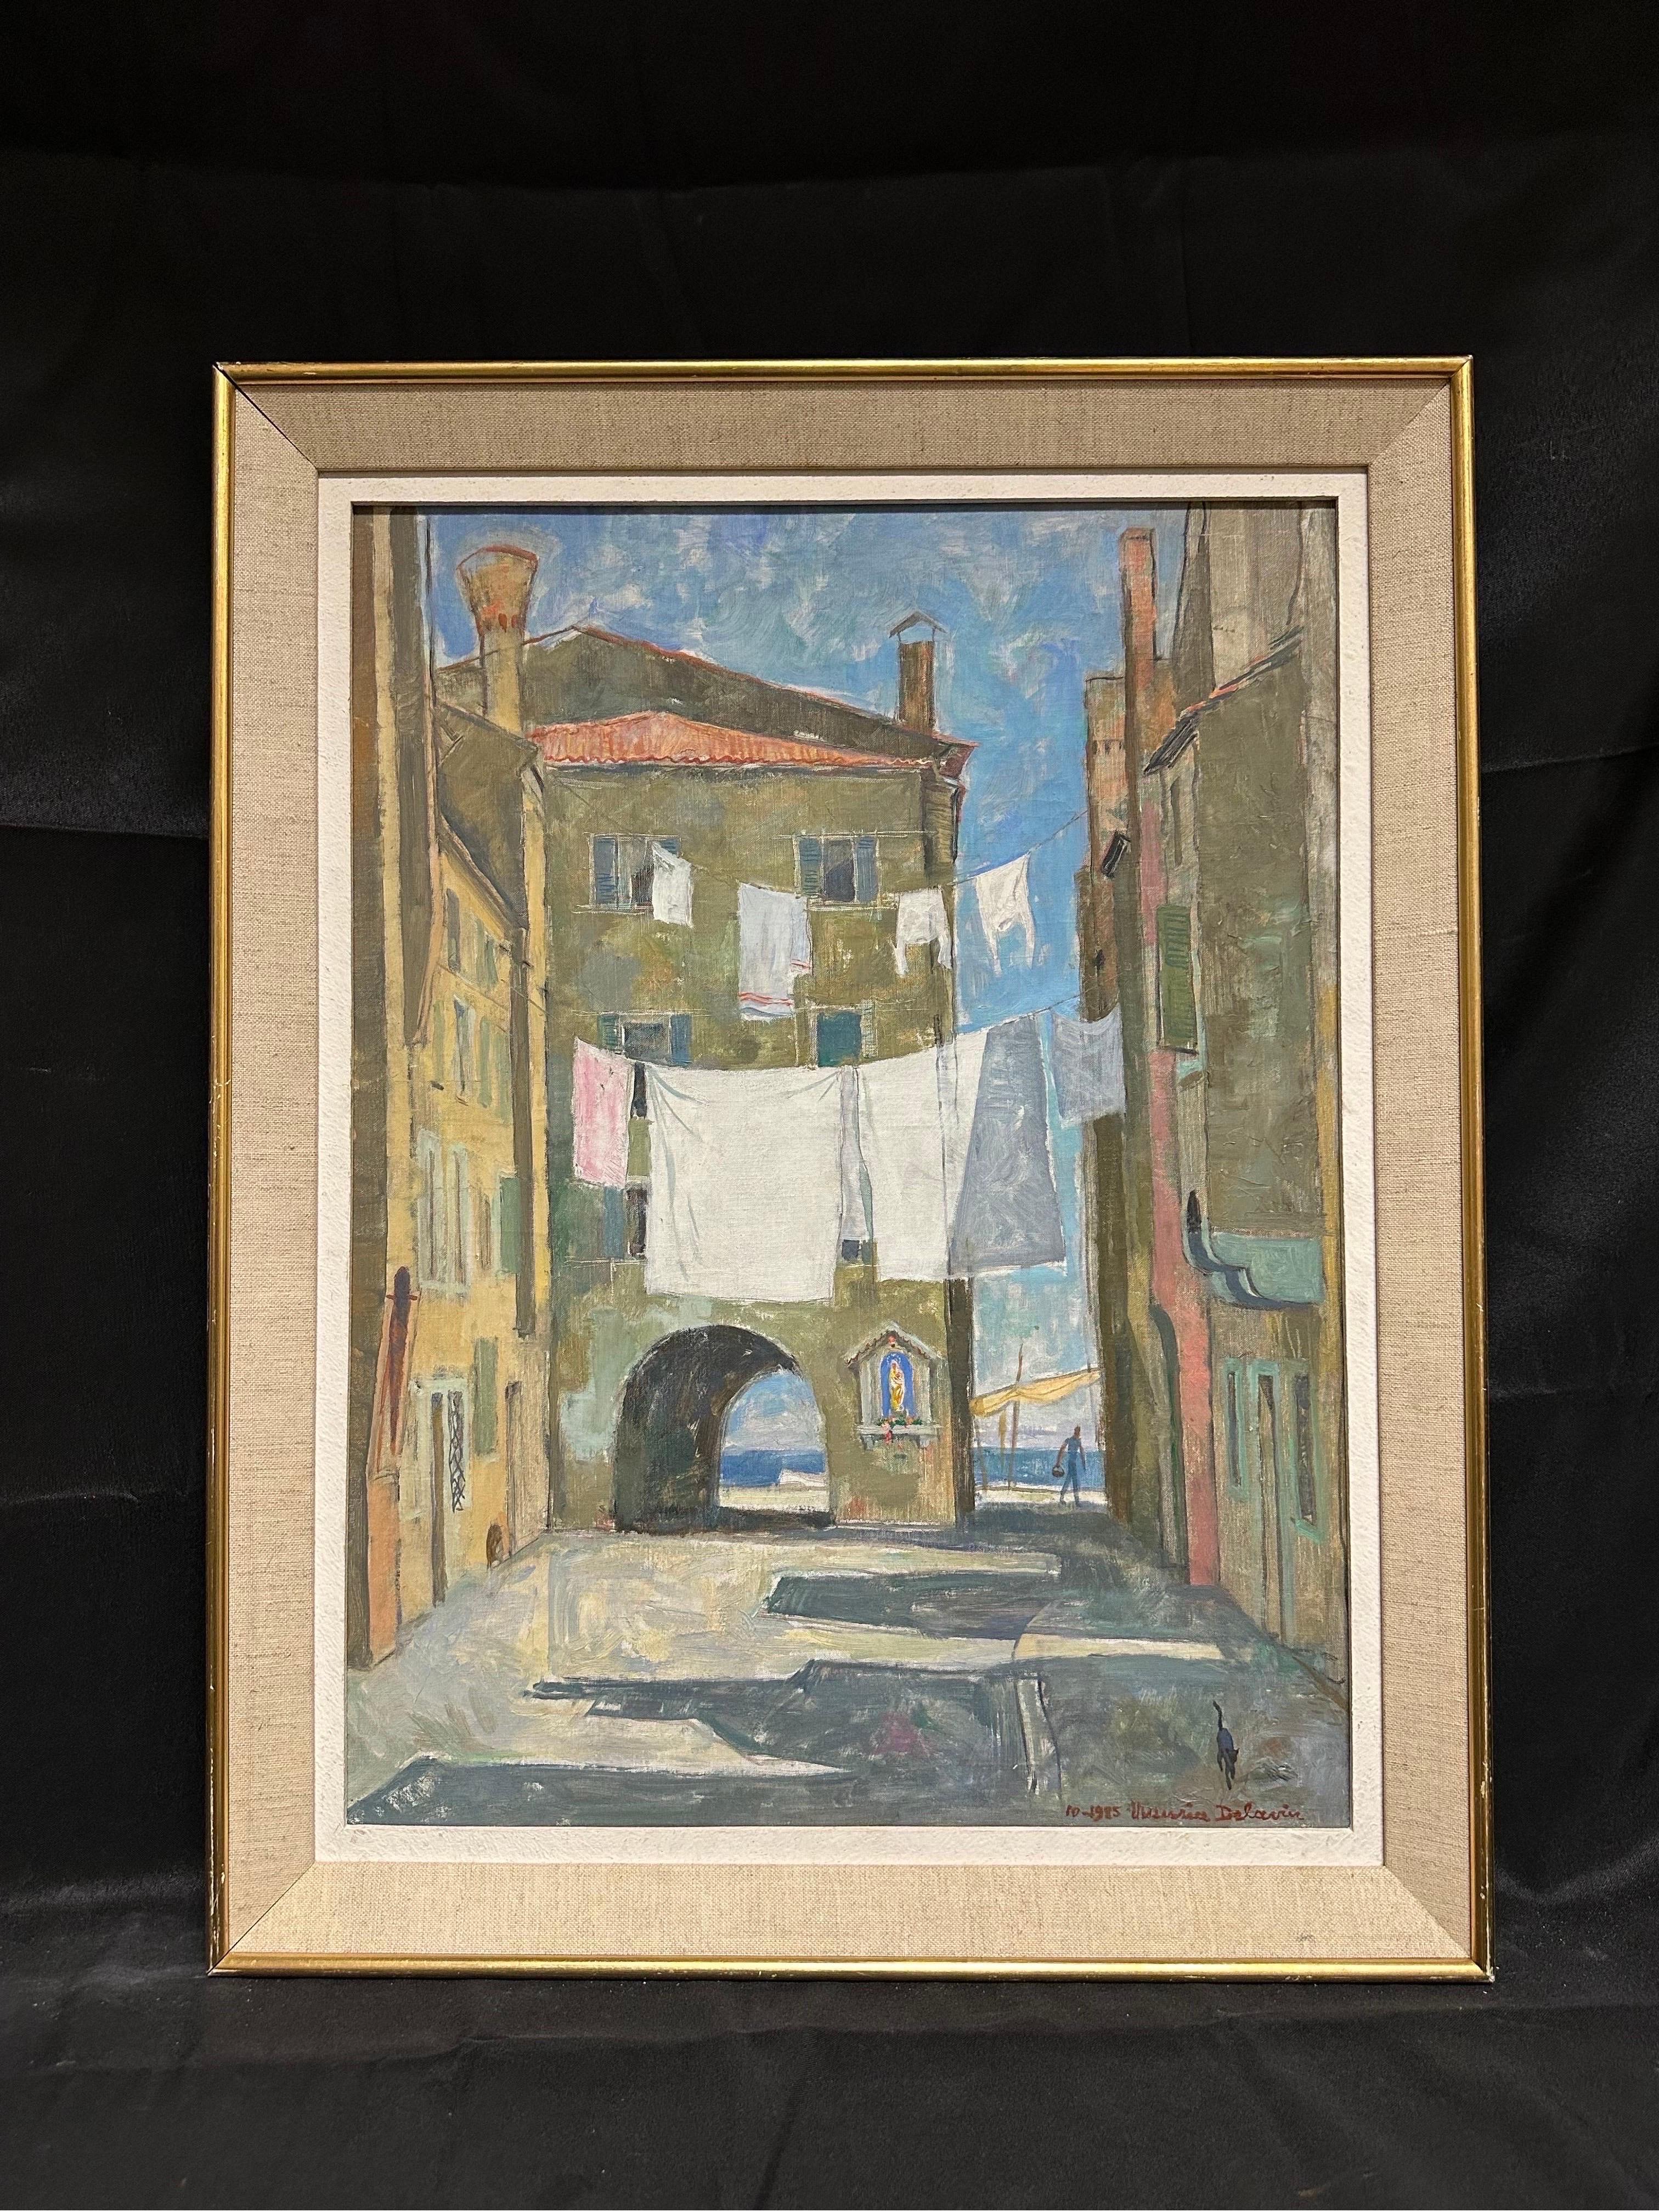 The Washing Line, Venice
by Maurice Delavier (French 1902-1986)
signed, dated 1985 lower right corner
oil painting on canvas, 24 x 18 inches
framed: 28 x 22 inches
condition: overall very good and original; frame looks original to the piece and has